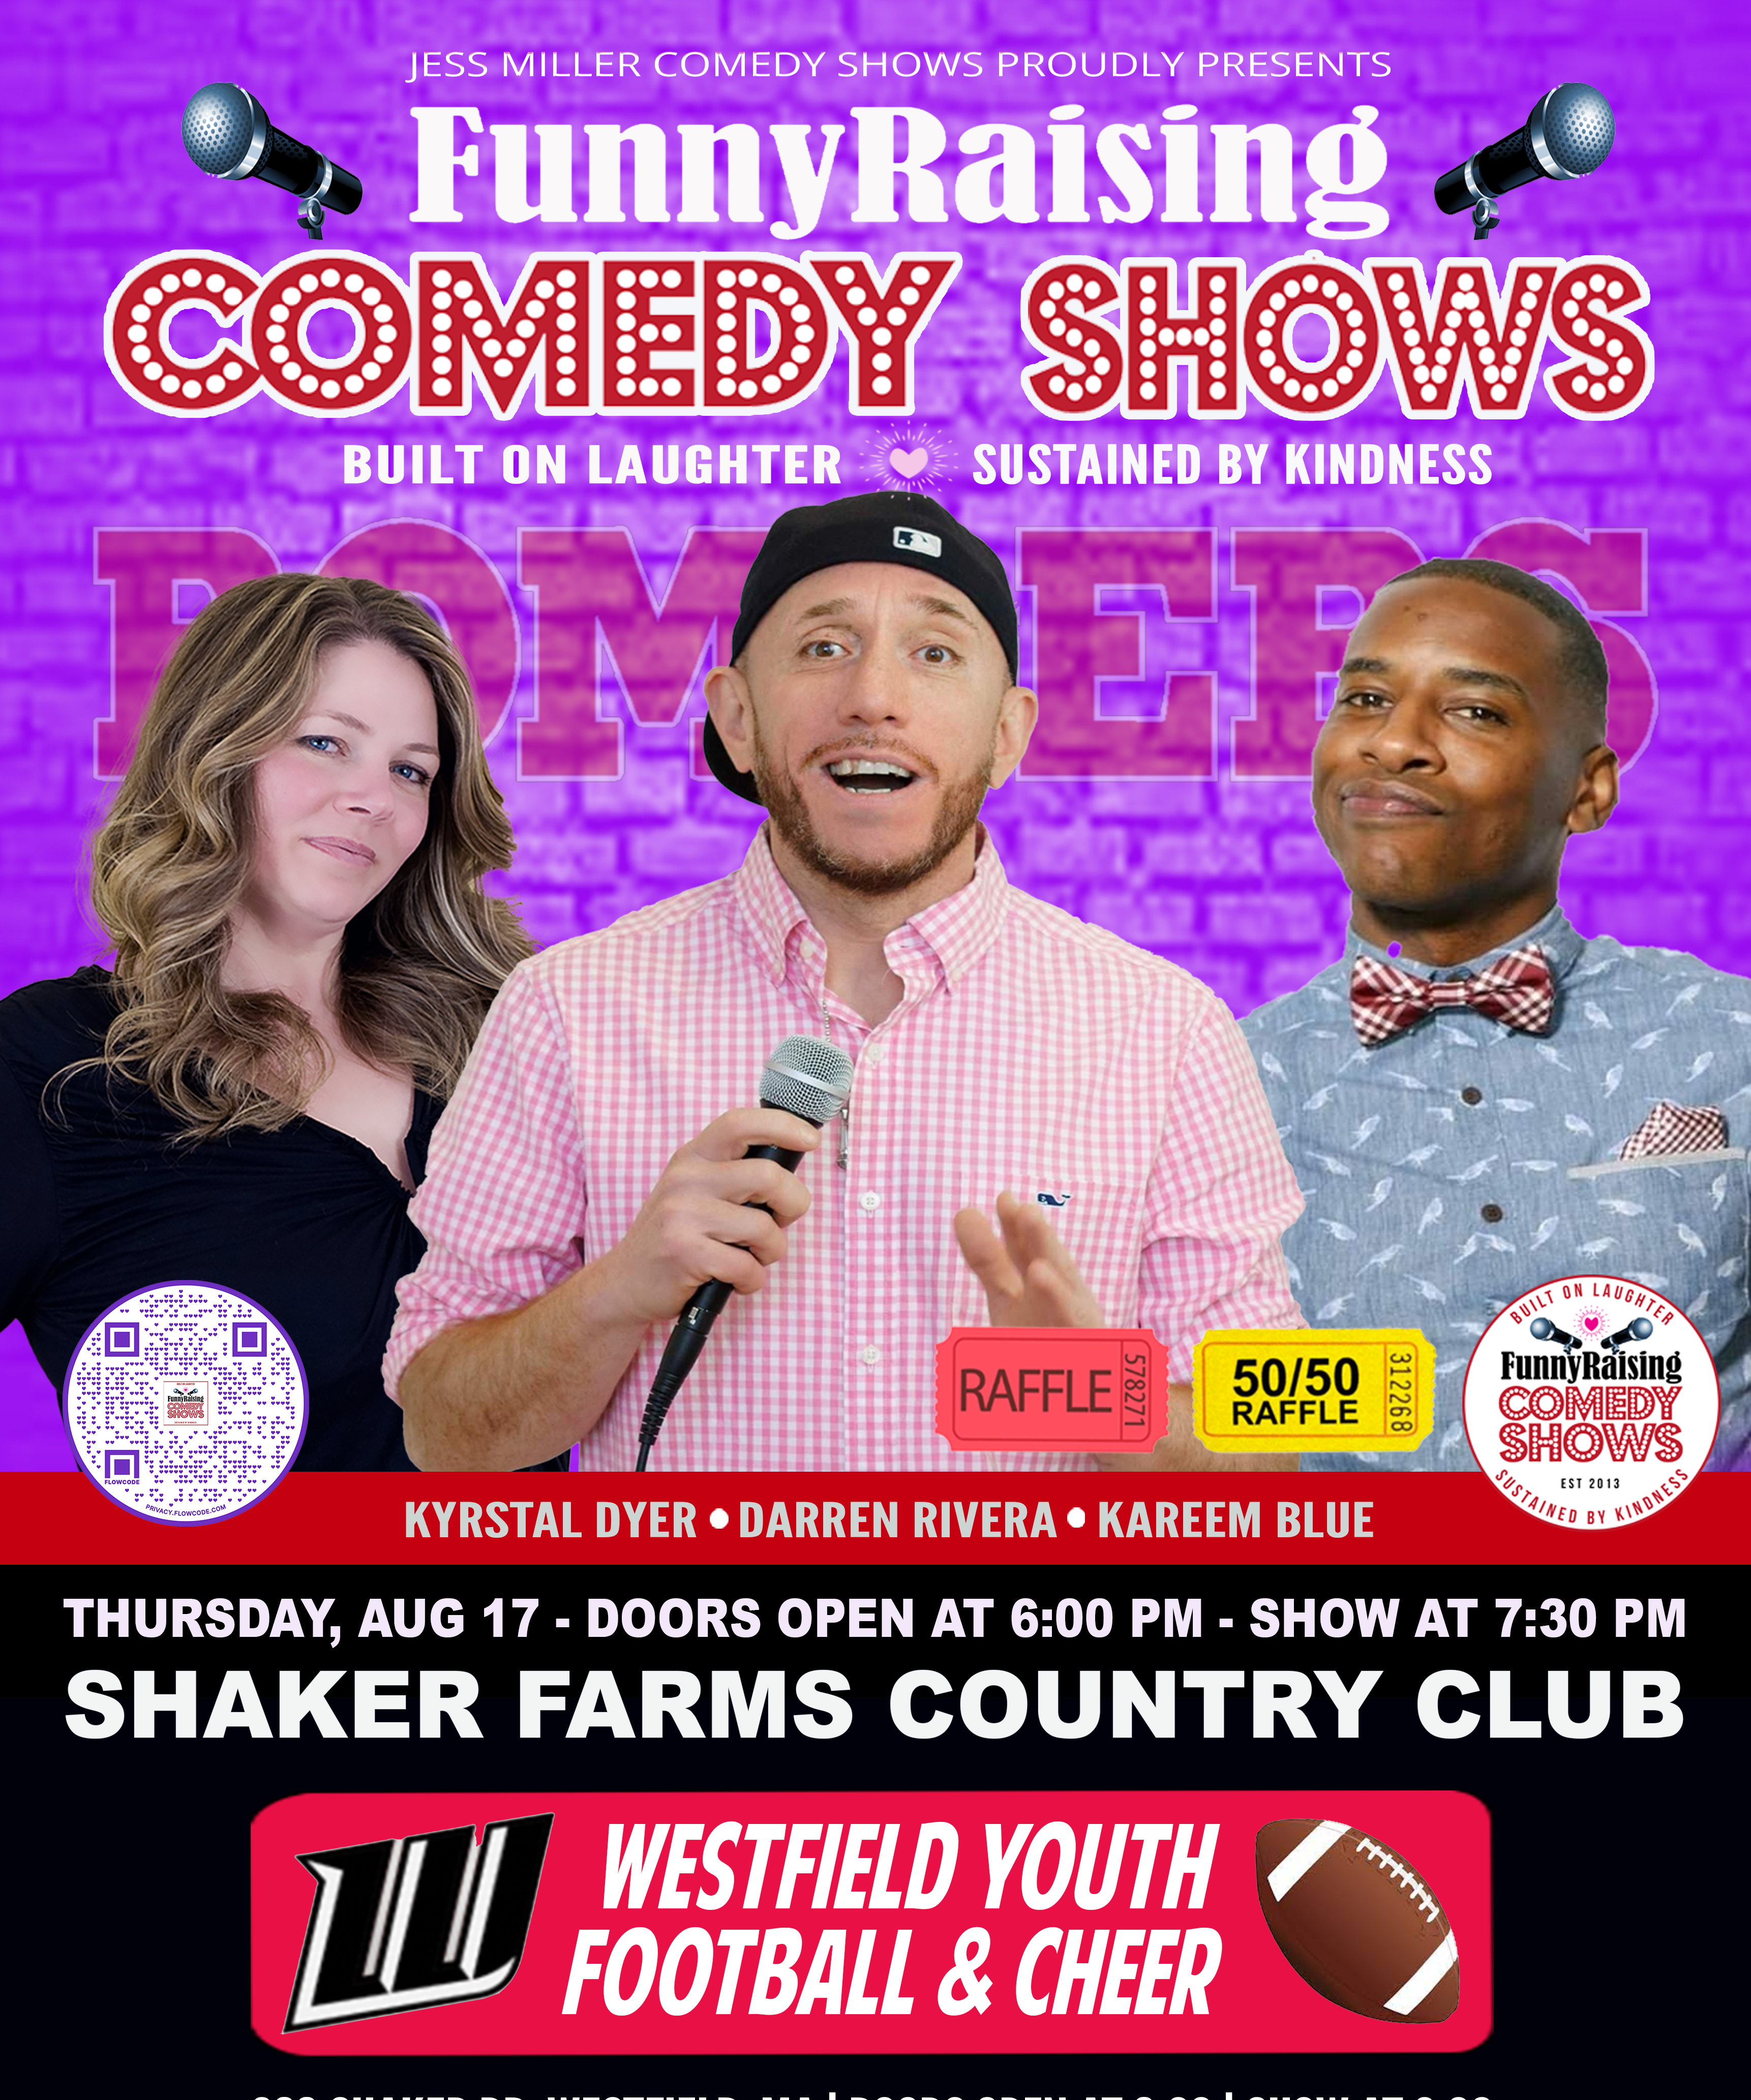 FunnyRaising Comedy Show for Westfield Youth Football & Cheer